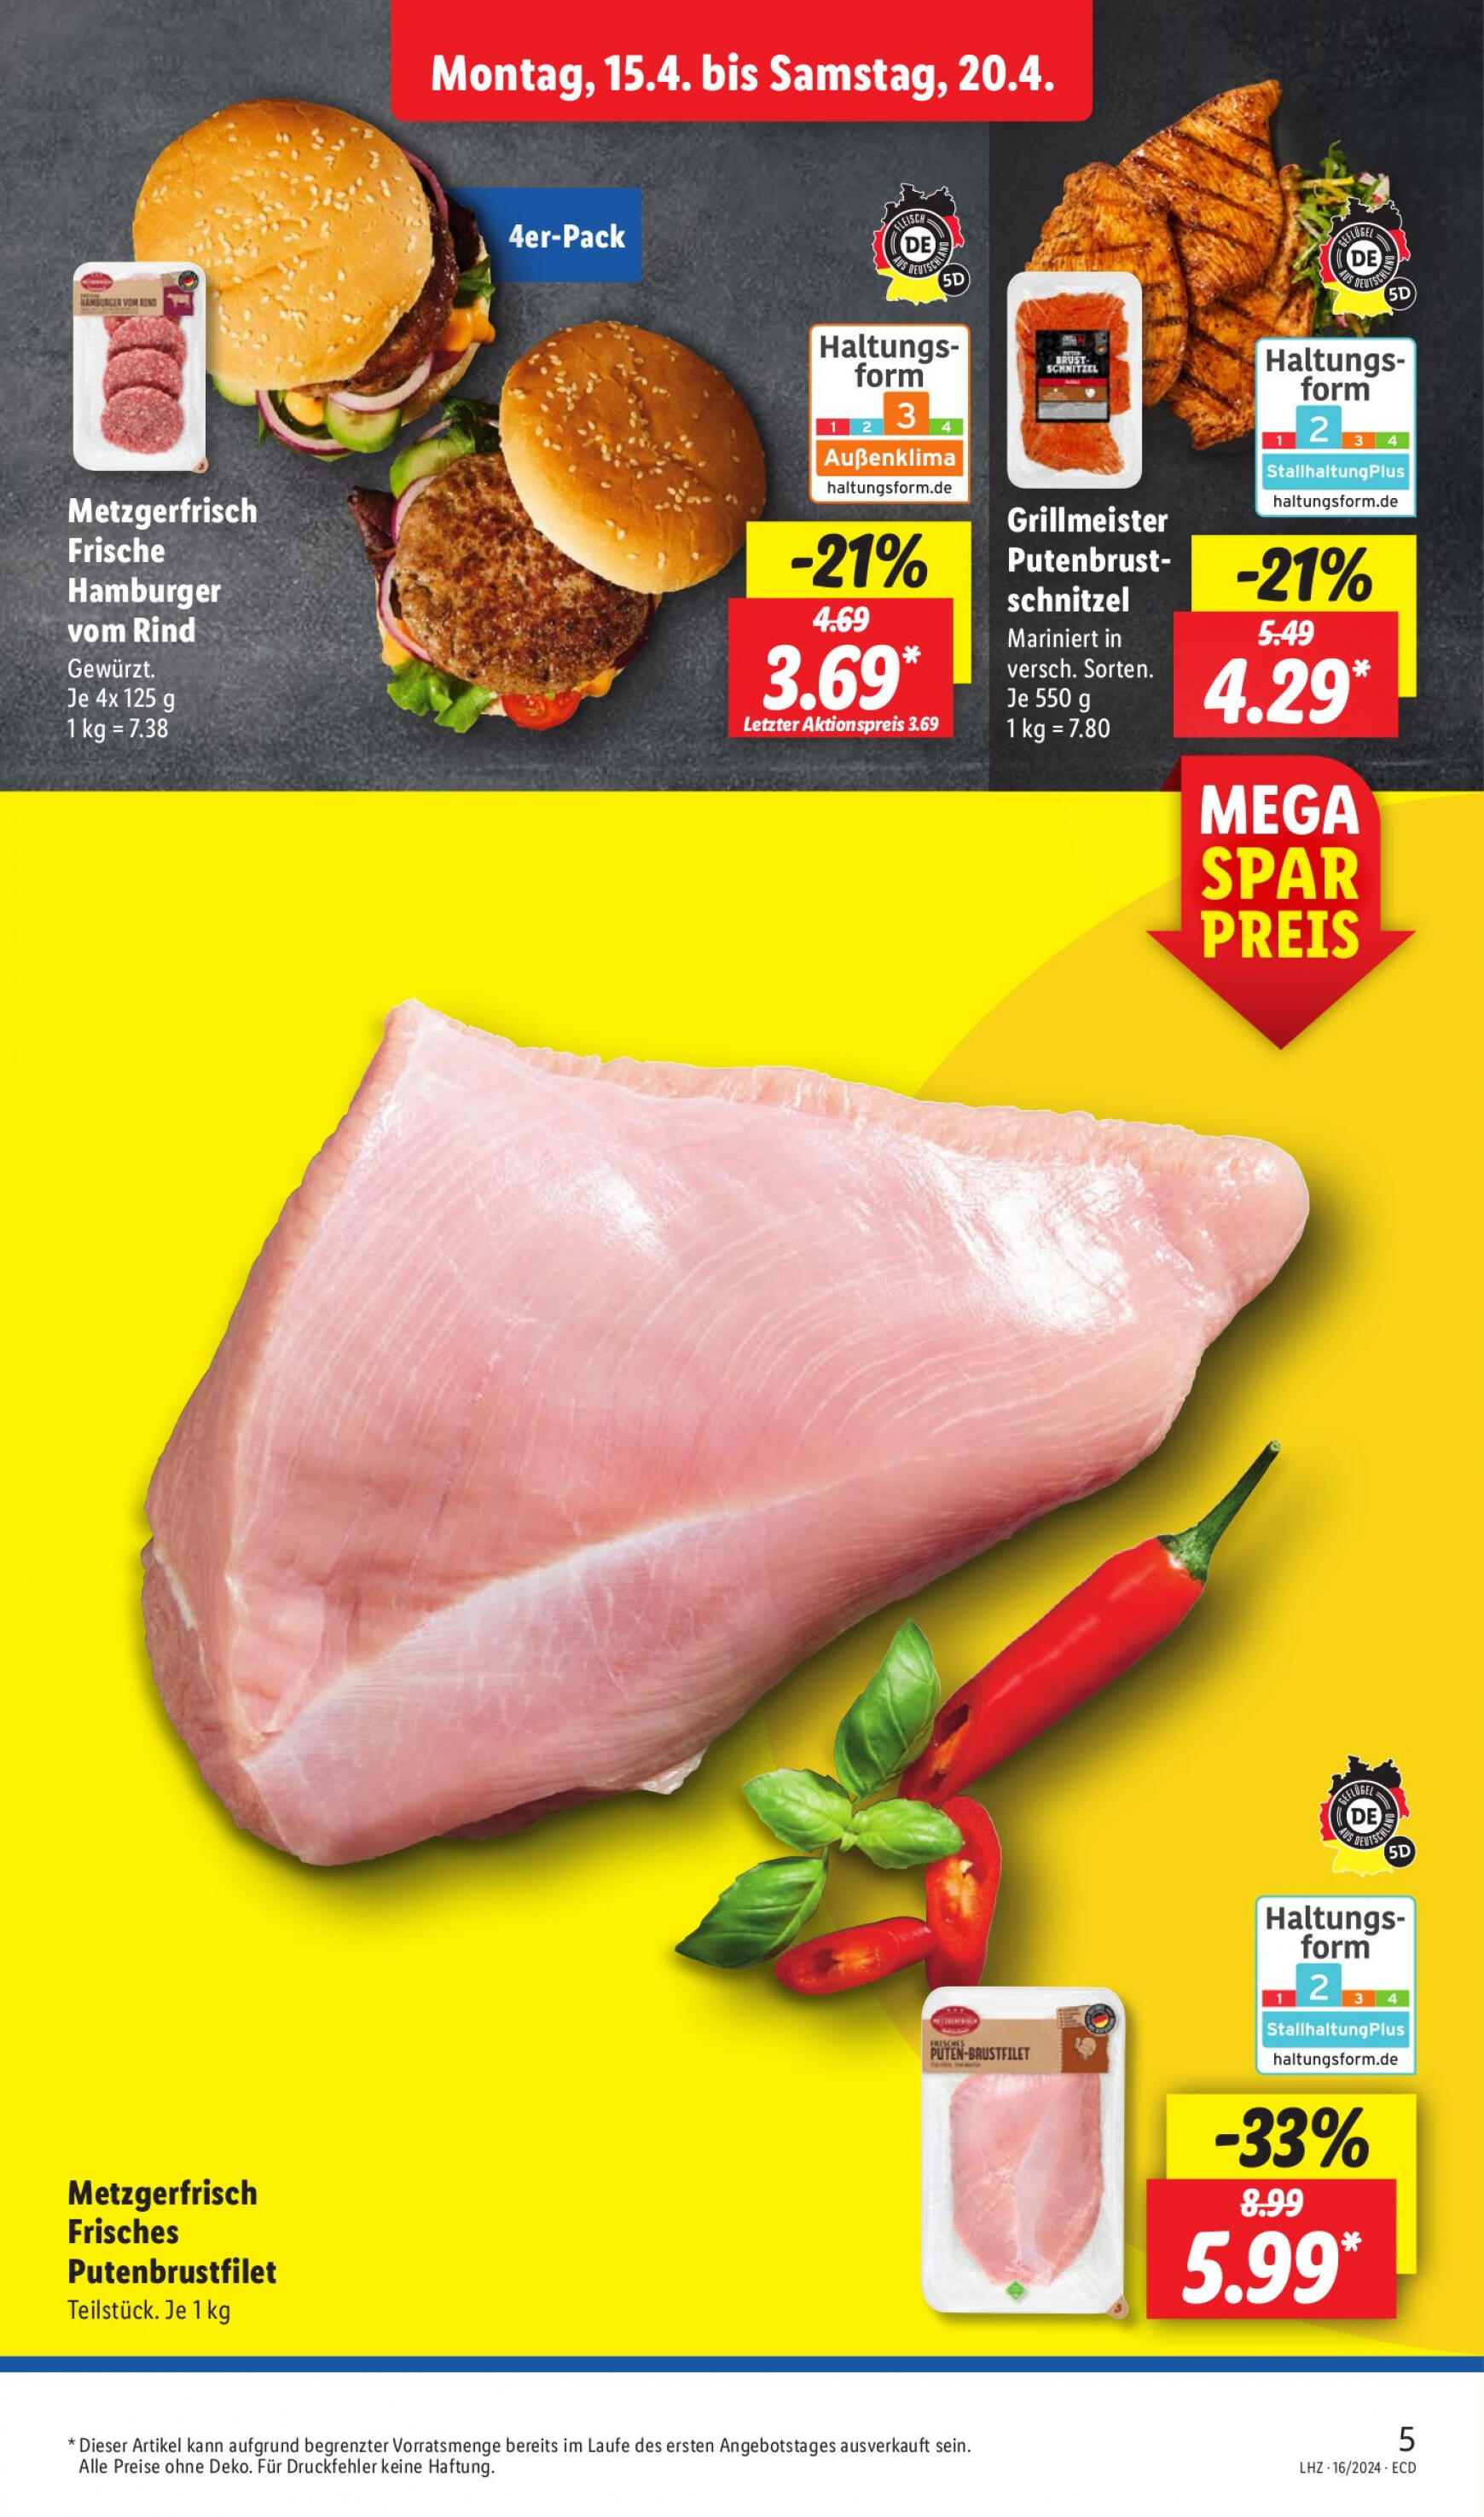 lidl - Flyer Lidl aktuell 15.04. - 20.04. - page: 5